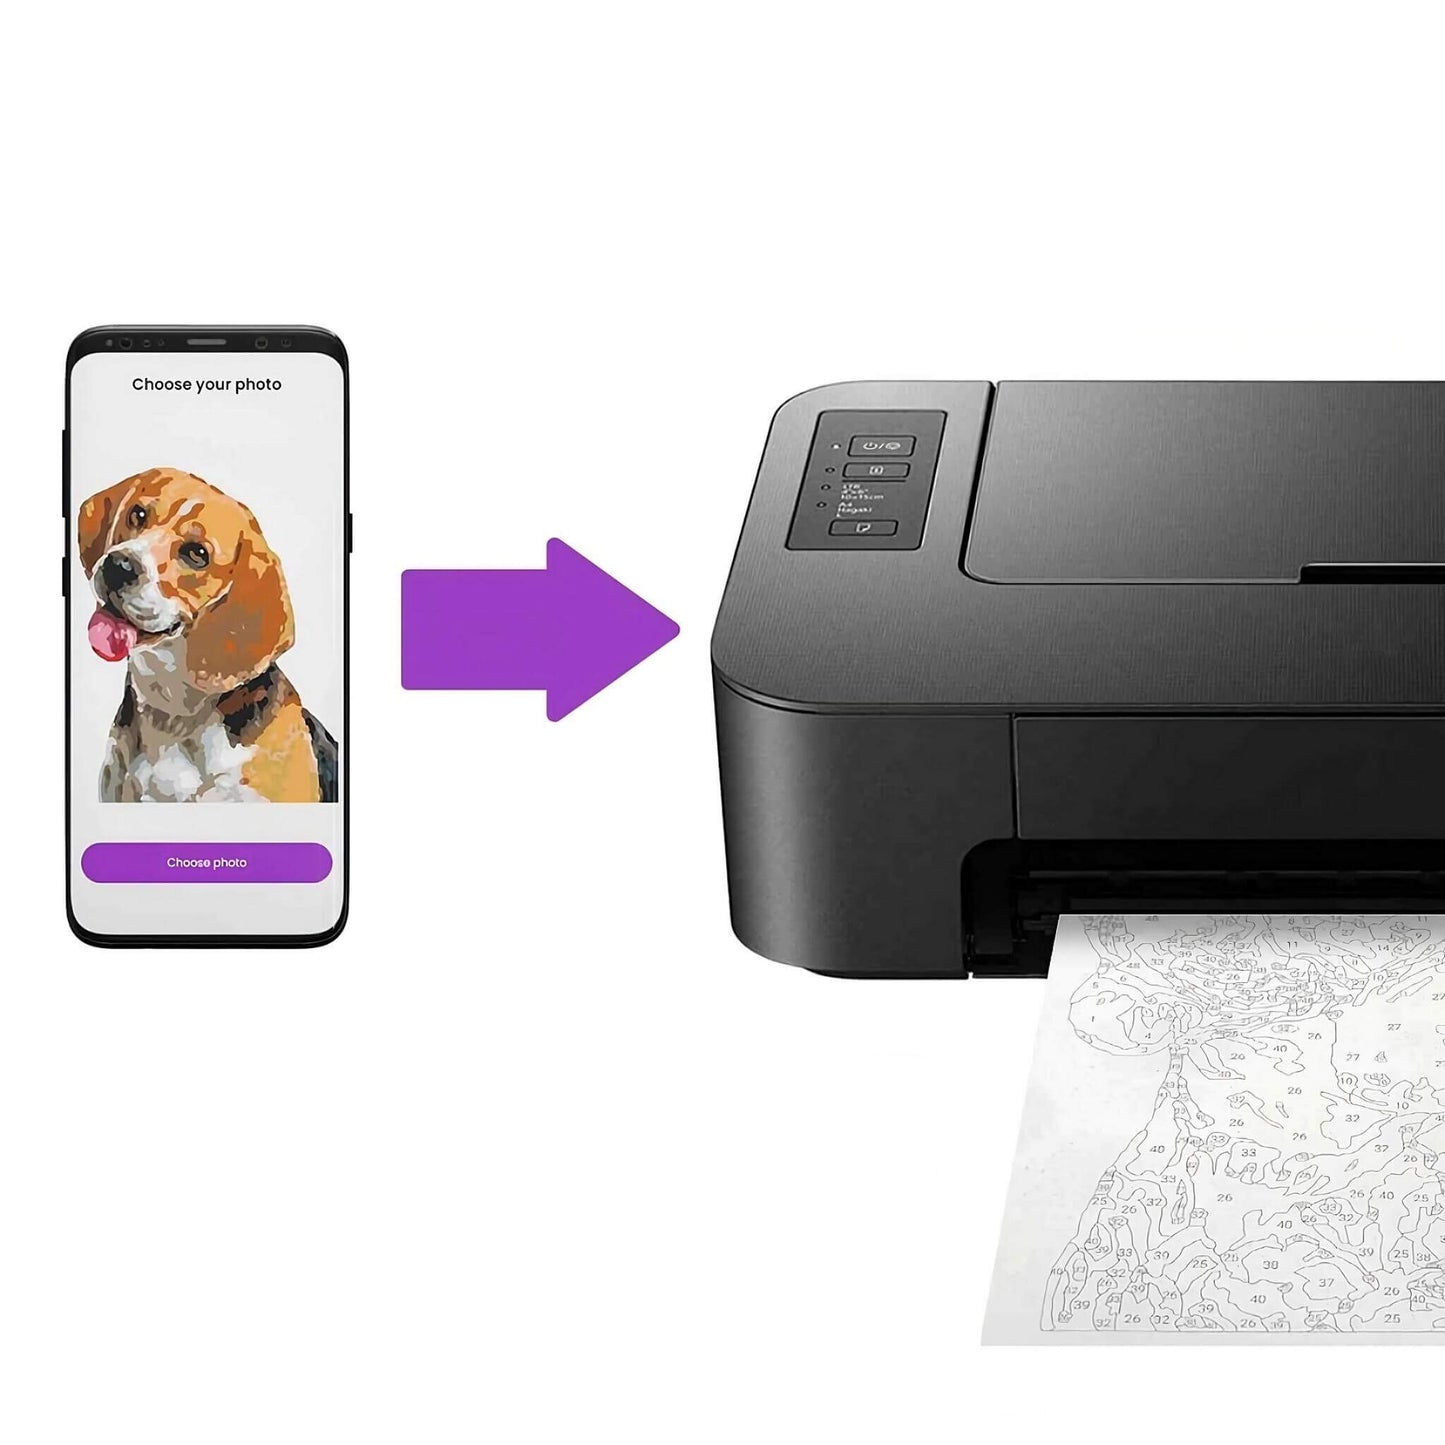 A smartphone displaying a painting preview of a dog with a 'Choose photo' button, pointing with a purple arrow towards a printer which is printing out a paint by number design of the dog.